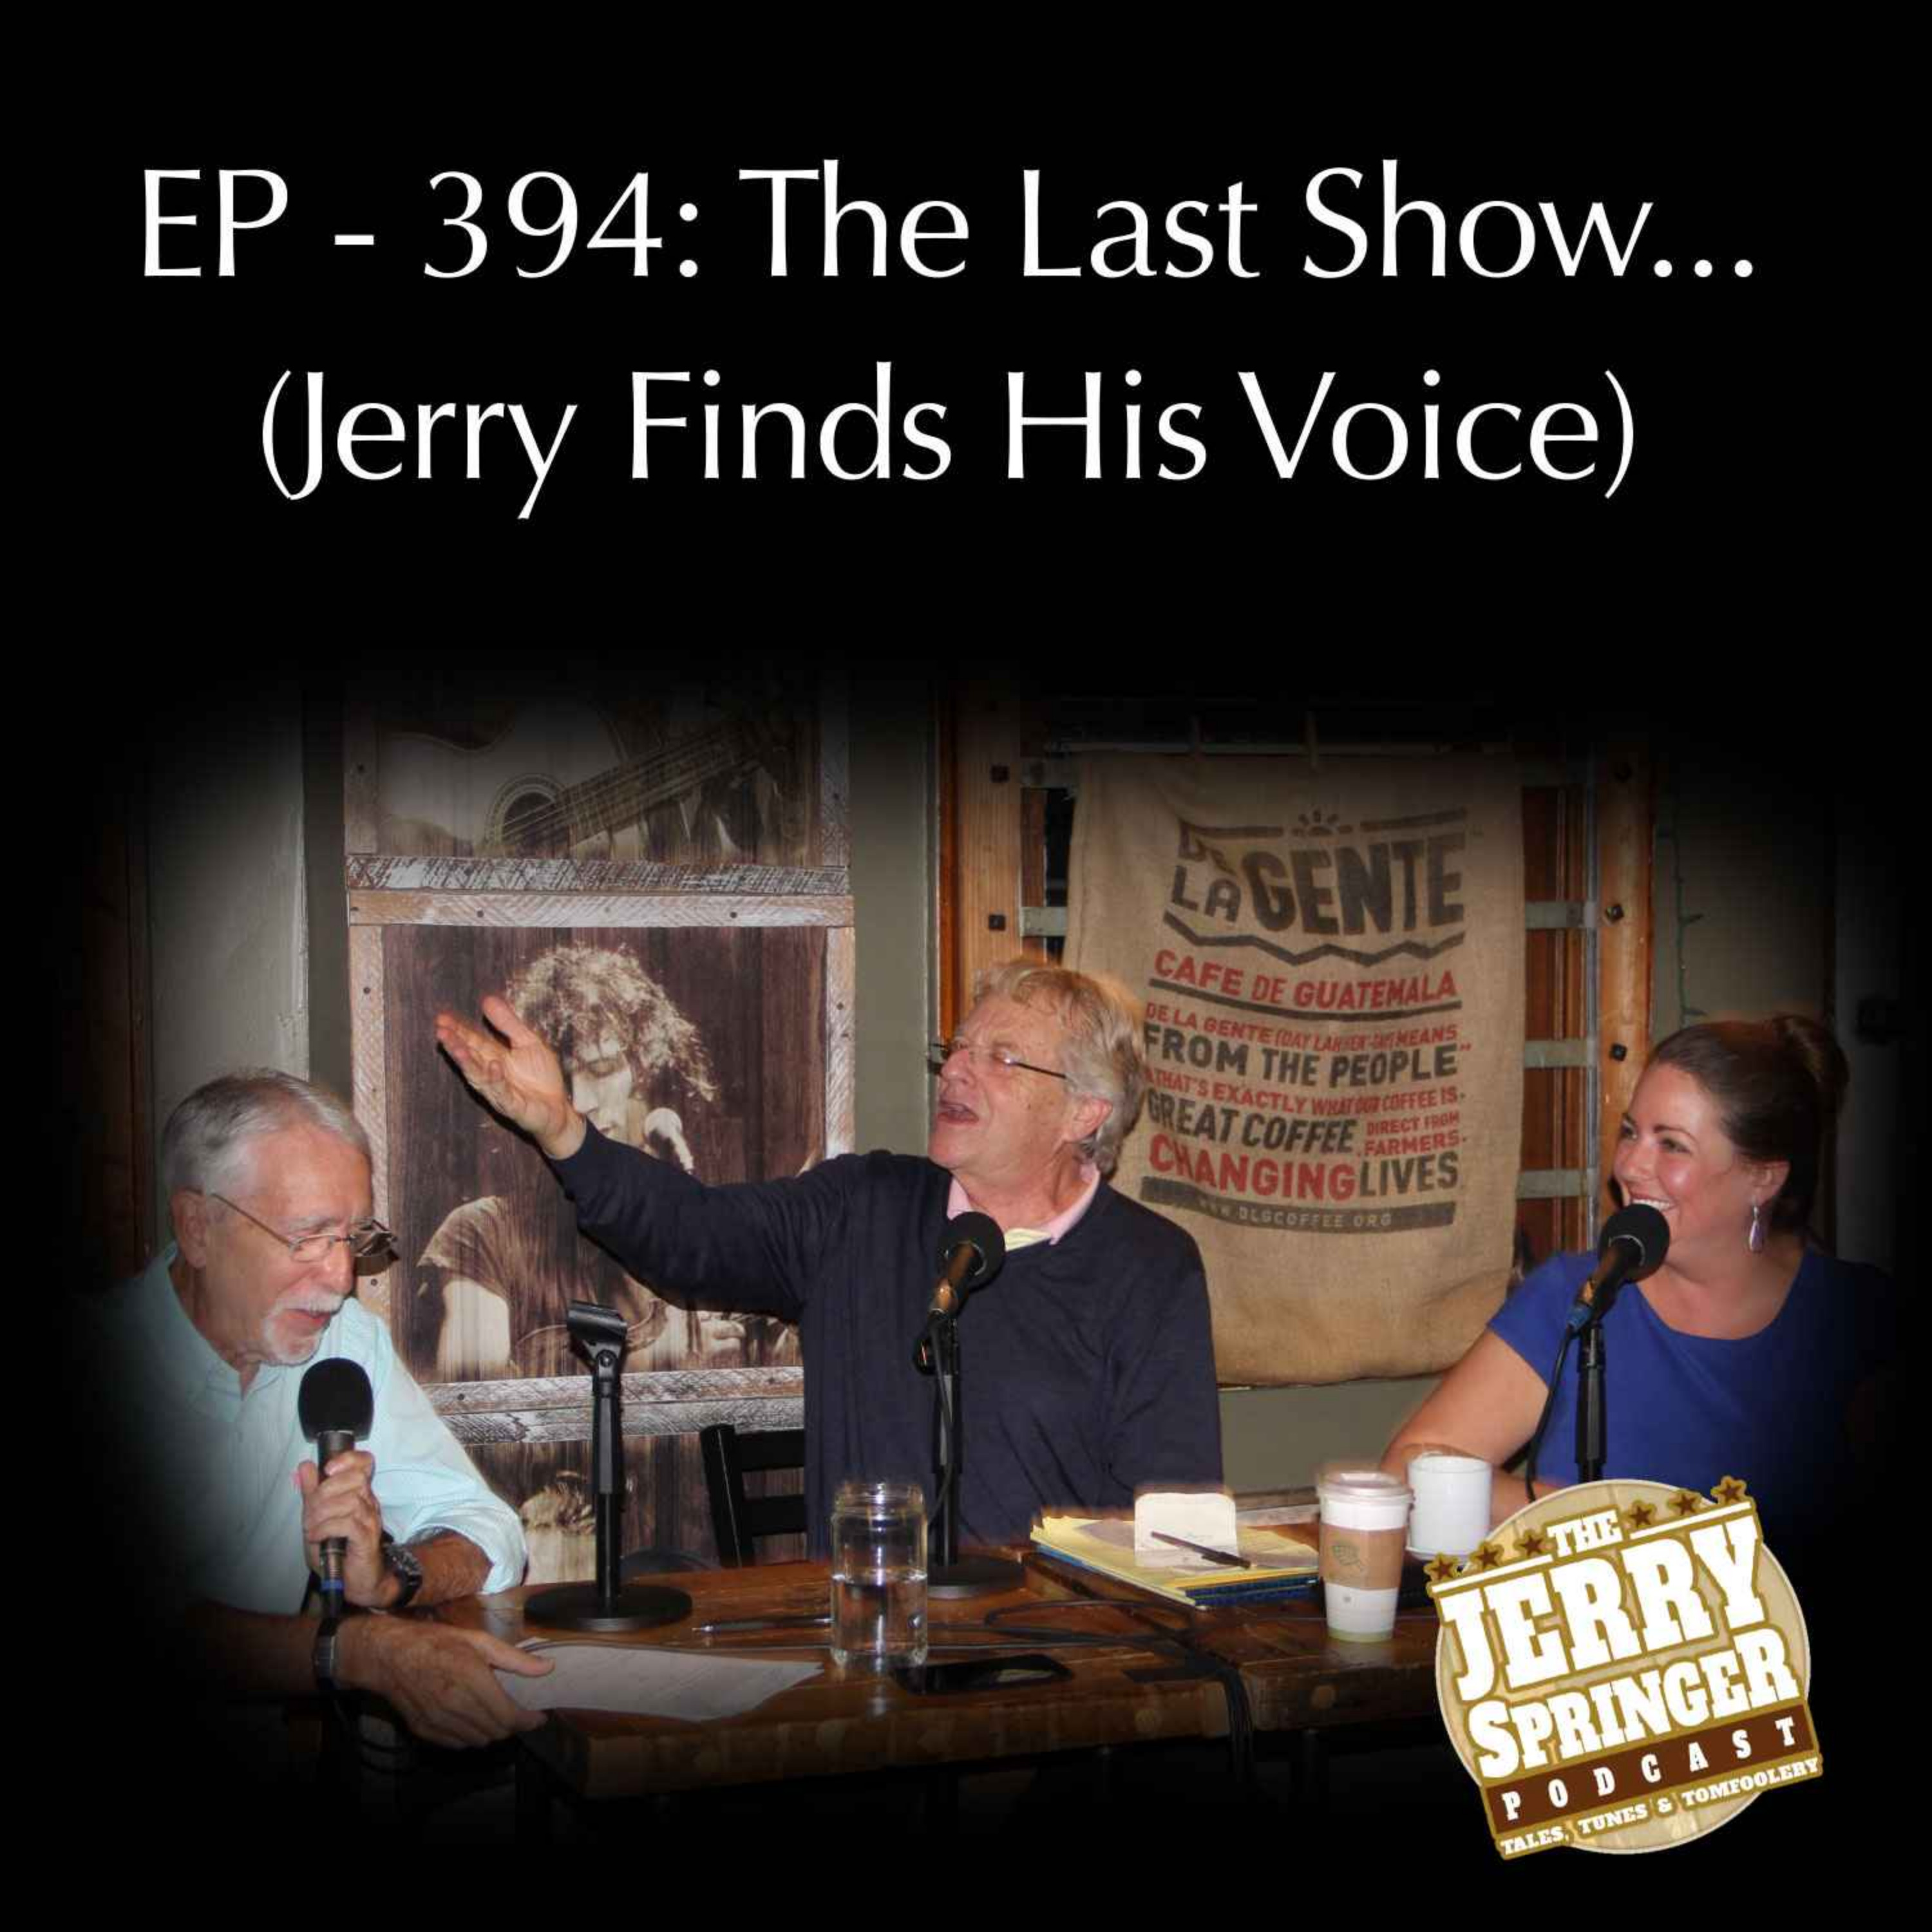 The Last Show...(Jerry Finds His Voice) EP - 394